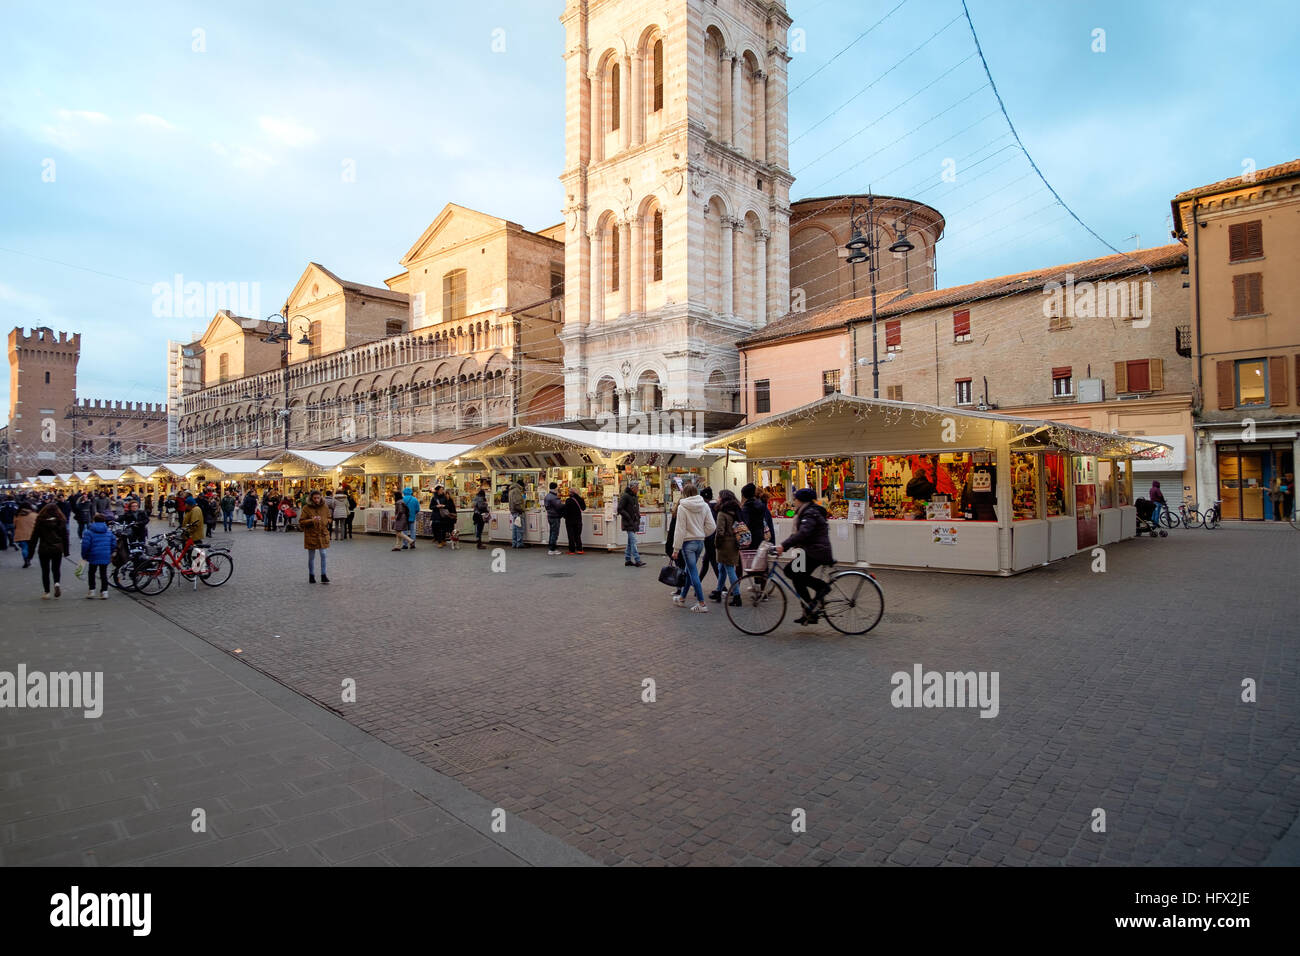 Ferrara, Italy - December 29 2016: Piazza Trento Trieste in Ferrara, Italy. Christmas markets that takes place in the square in the historic center of Stock Photo